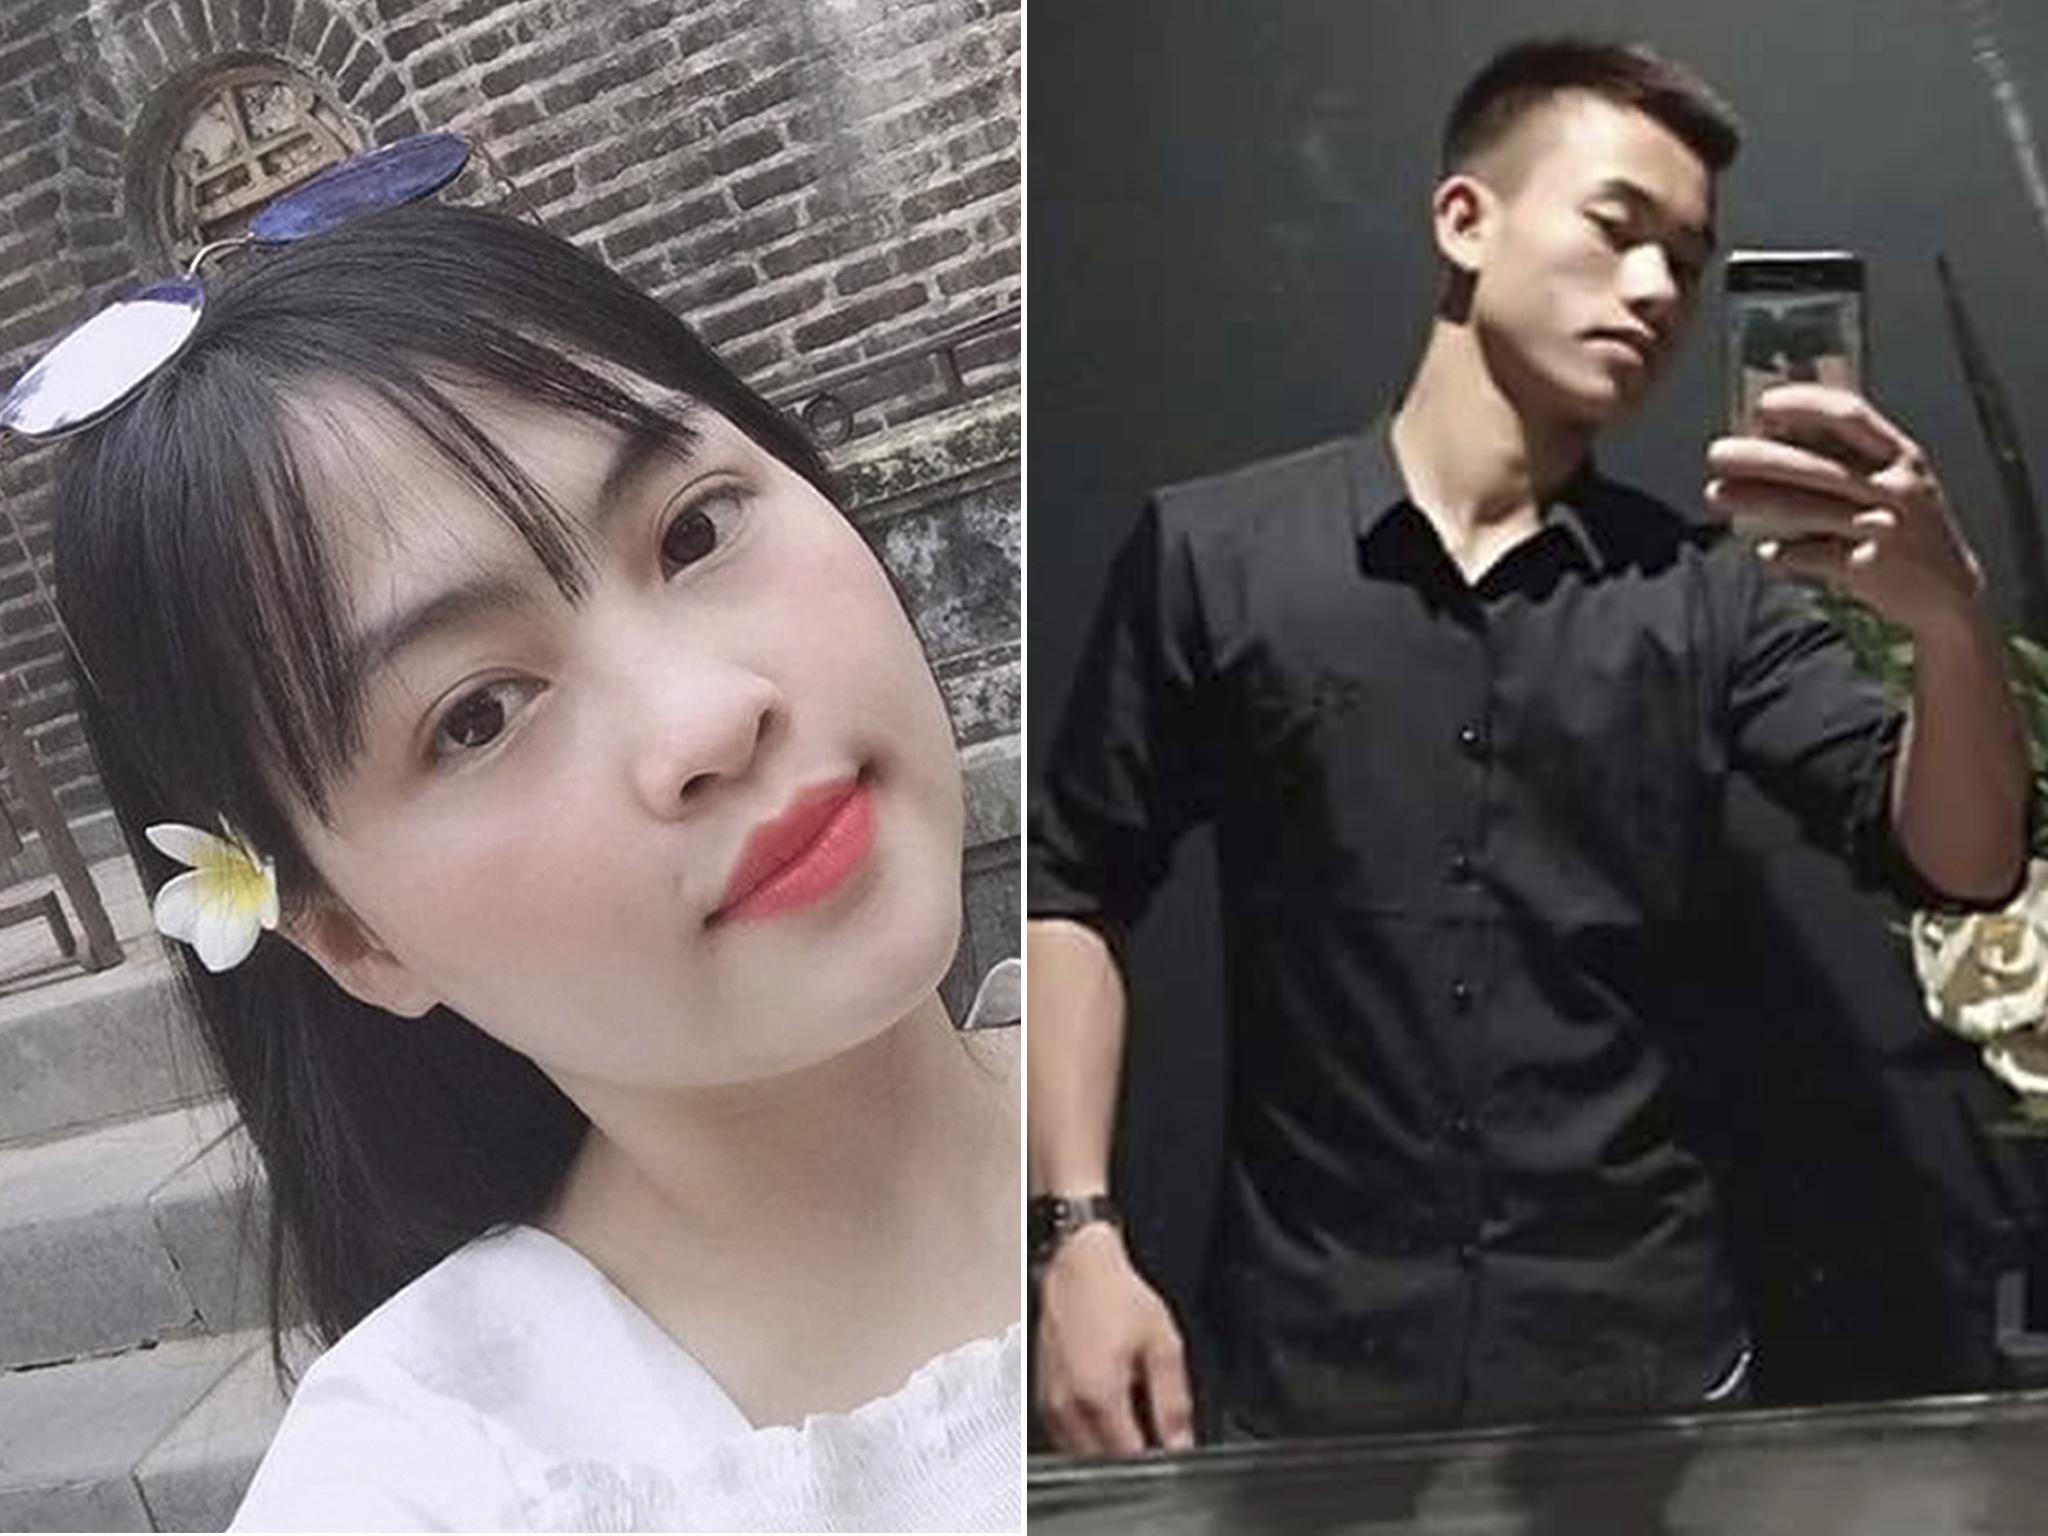 Pham Thi Tra My, 26, and Nguyen Dinh Luong, 20, were among the 39 victims (Hoa Nghiem/AP)